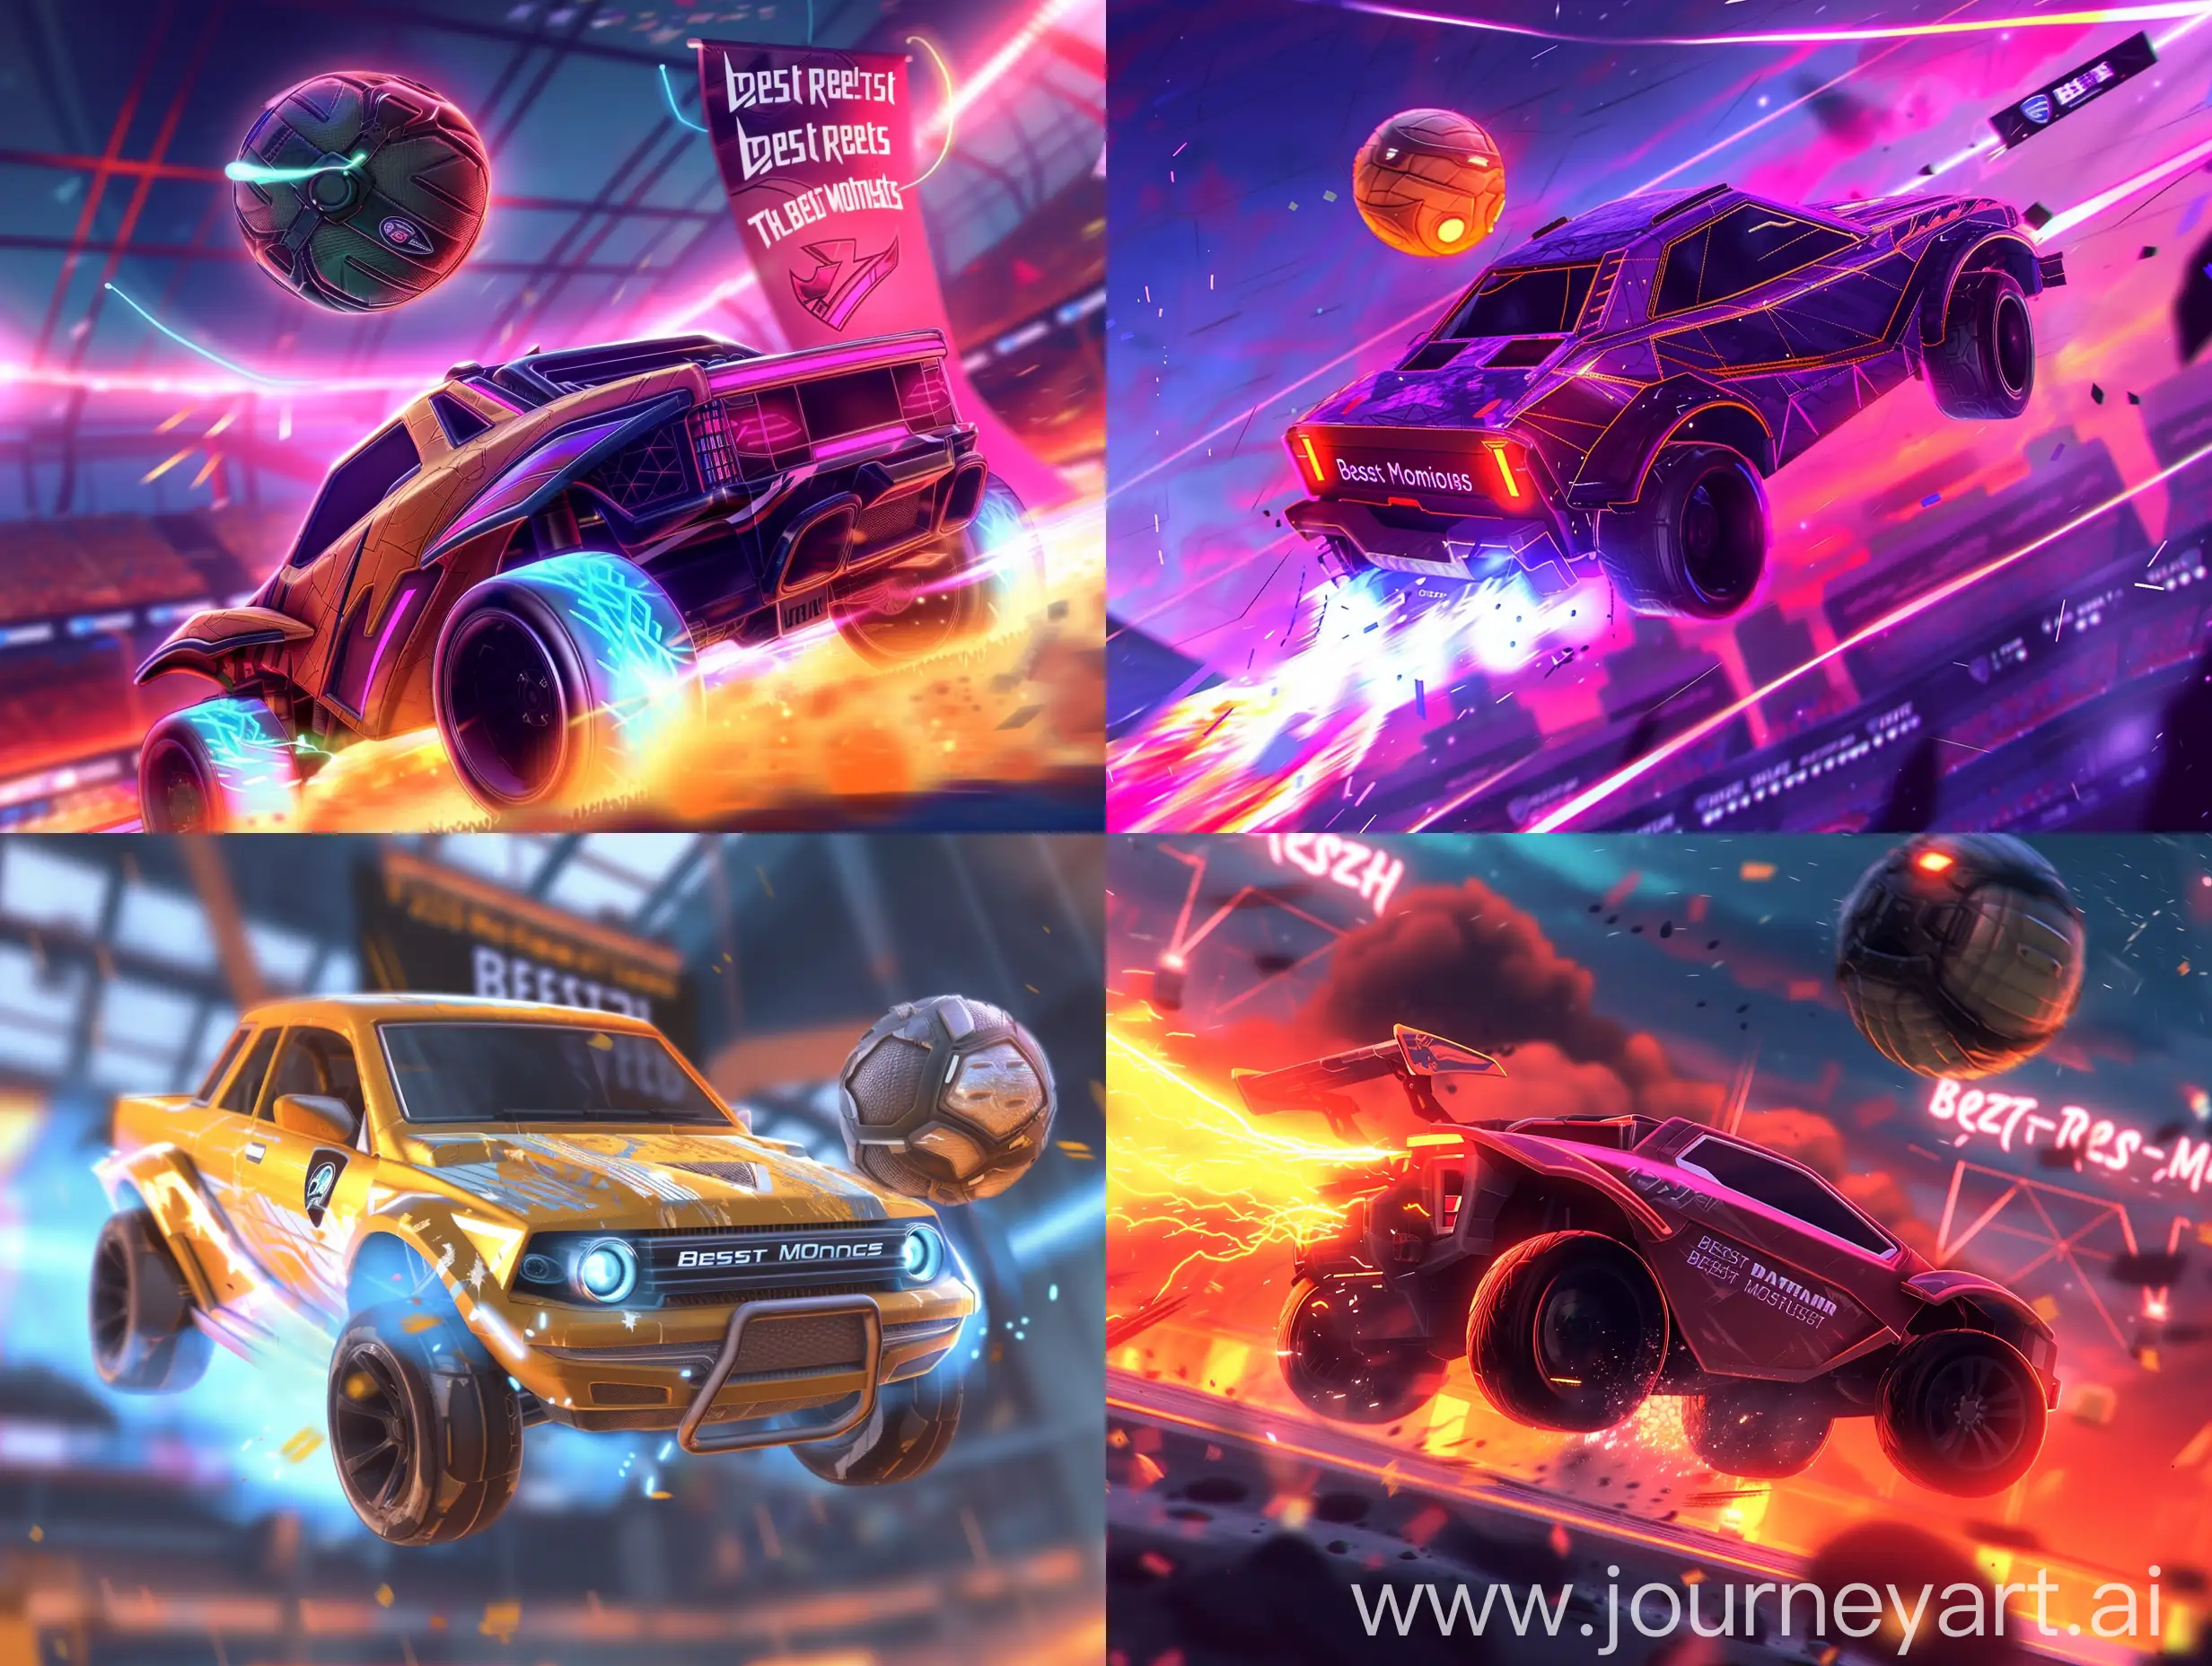 Dynamic-Rocket-League-Banner-Showcasing-Best-Replays-with-Futuristic-Car-Design